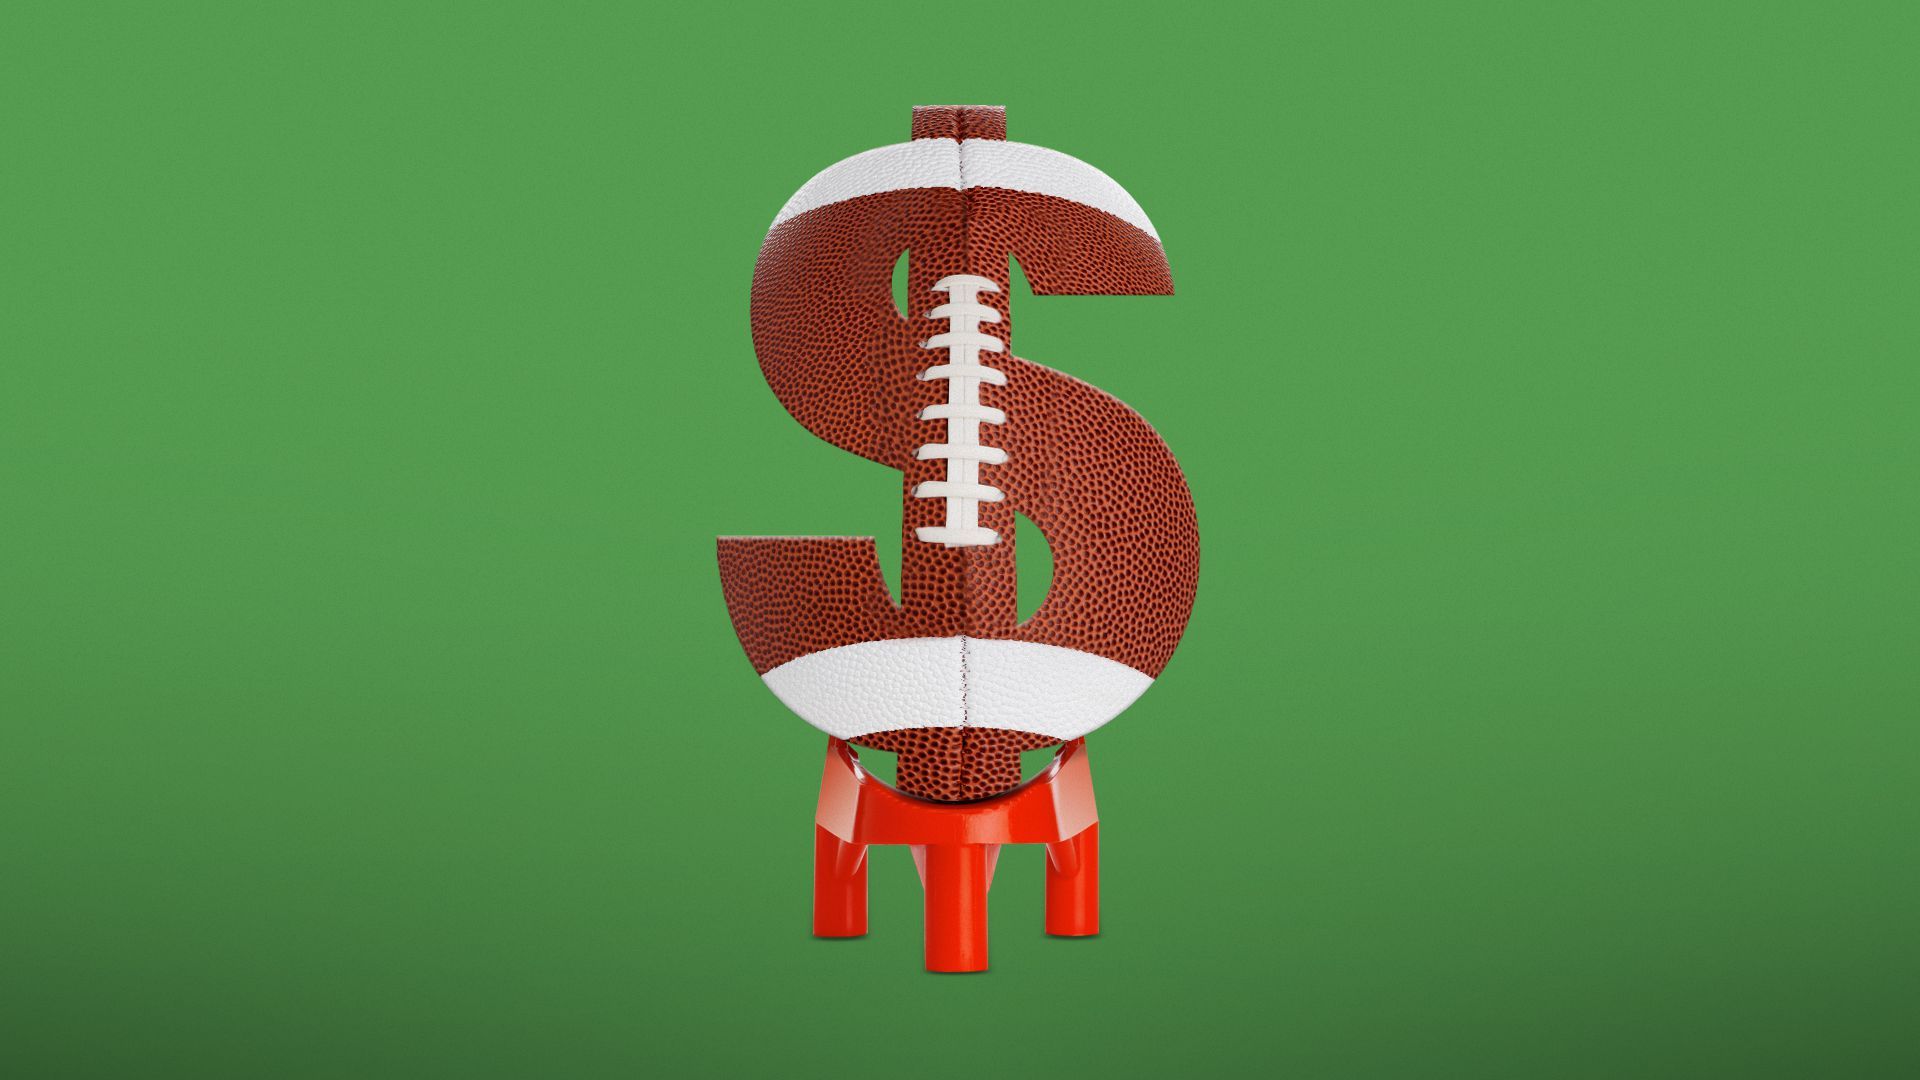 Illustration of a football in the shape of a dollar sign, sitting on a kickoff tee.